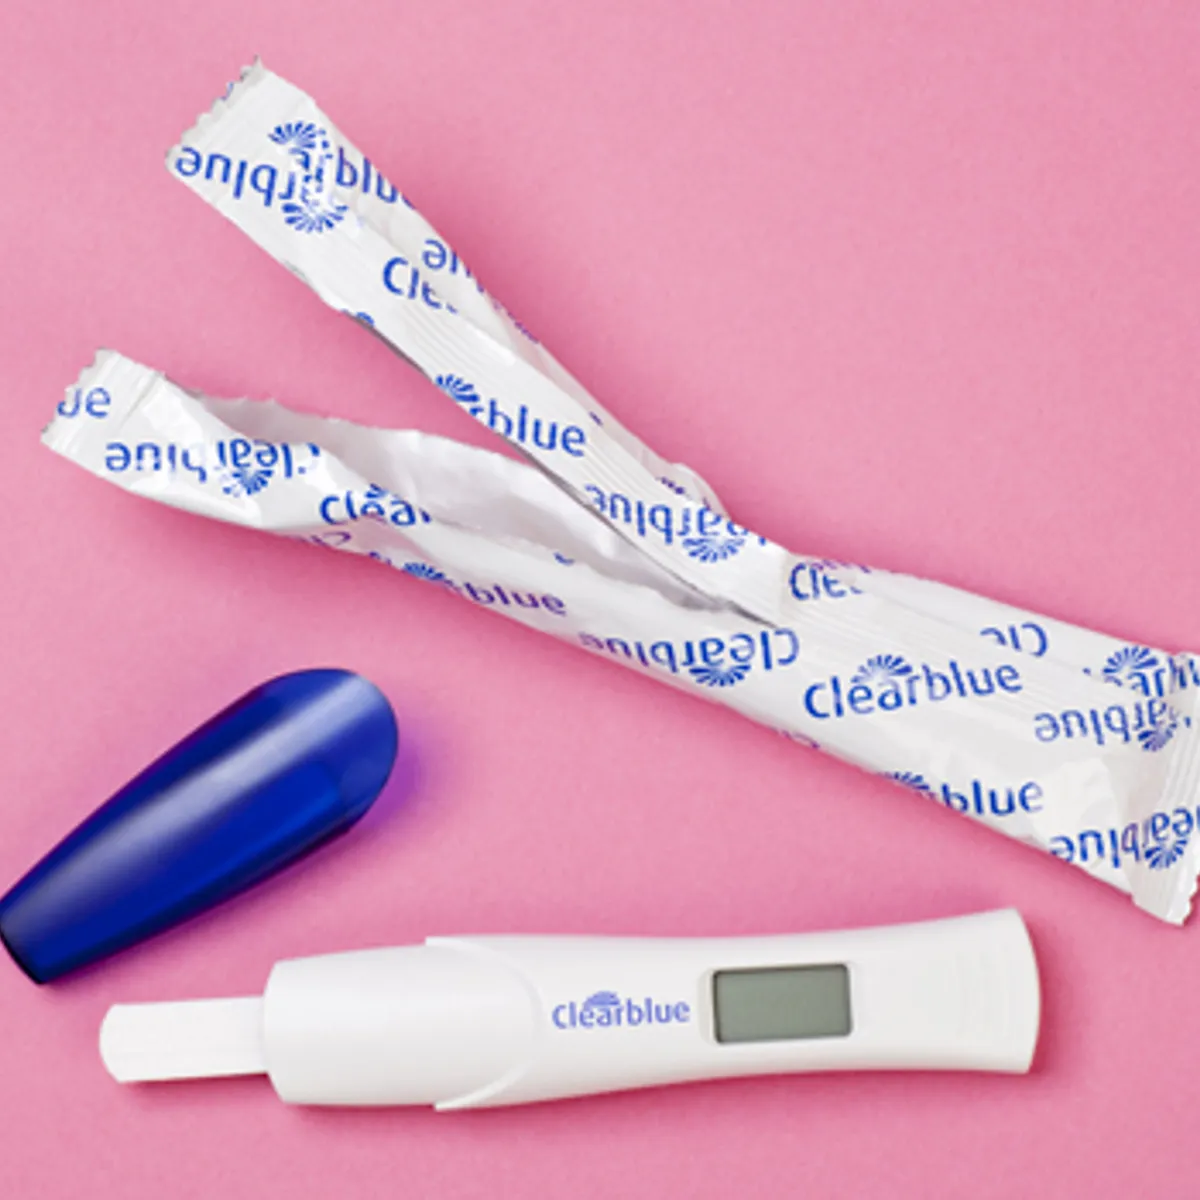 How Long Does it Take to Get Pregnant? - Clearblue